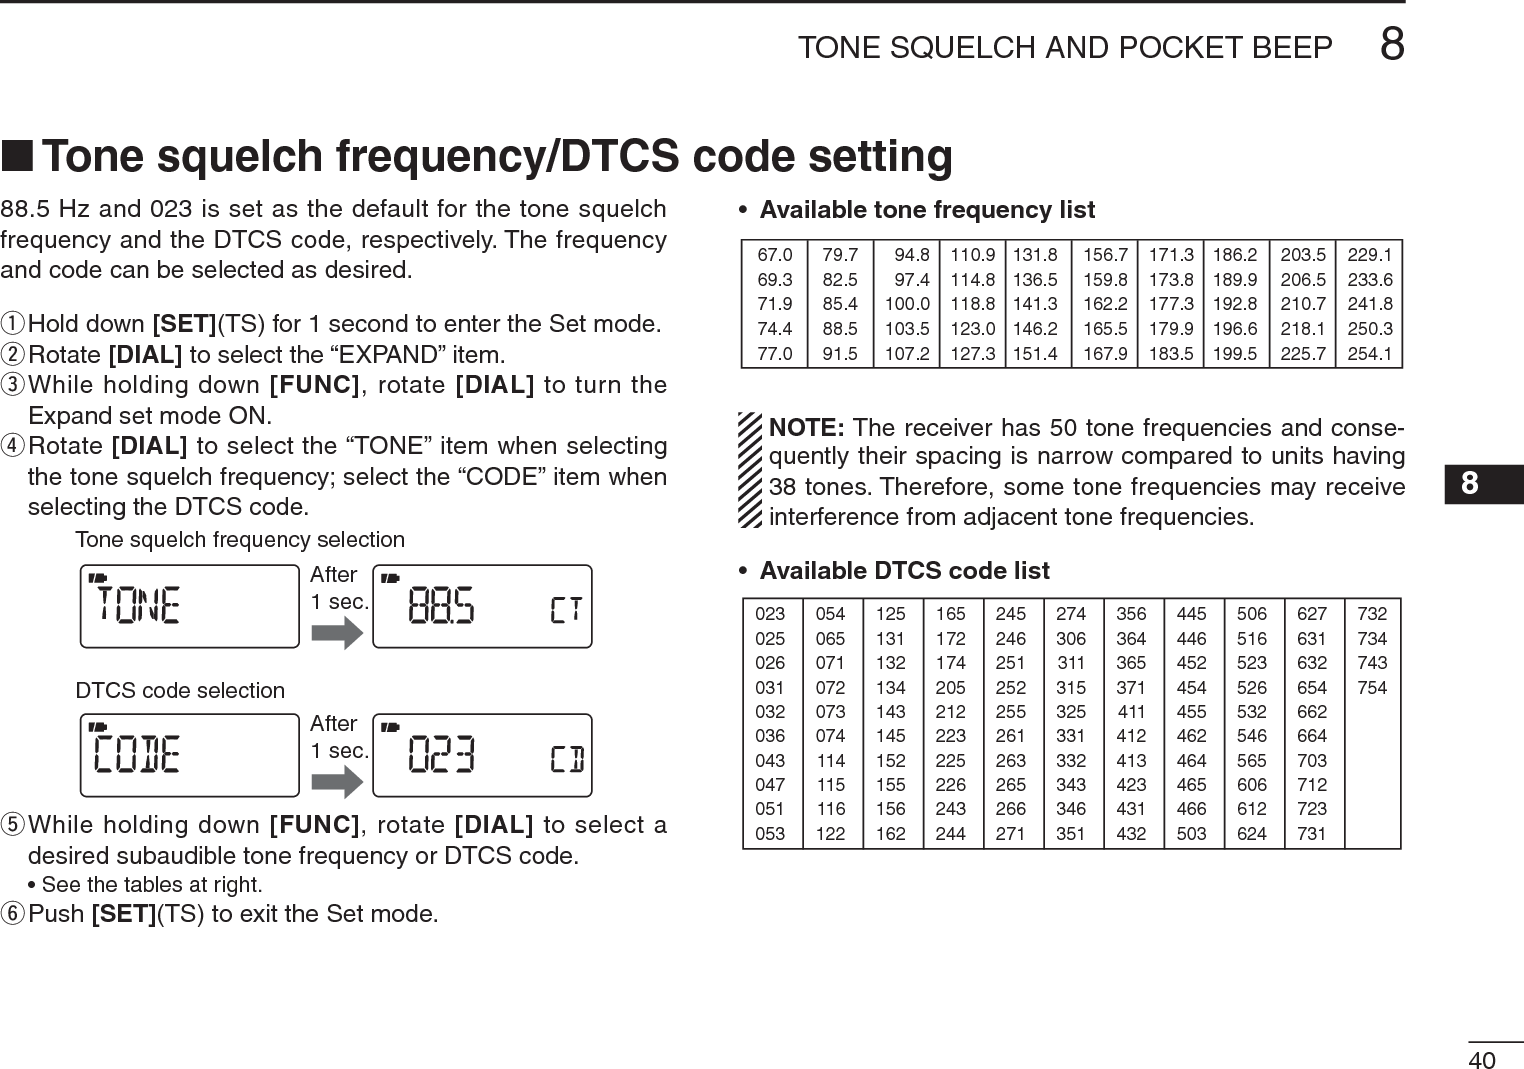 408TONE SQUELCH AND POCKET BEEP 8N Tone squelch frequency/DTCS code setting88.5 Hz and 023 is set as the default for the tone squelch frequency and the DTCS code, respectively. The frequency and code can be selected as desired.qHold down [SET](TS) for 1 second to enter the Set mode.wRotate [DIAL] to select the “EXPAND” item.e  While holding down [FUNC], rotate [DIAL] to turn the Expand set mode ON.r  Rotate [DIAL] to select the “TONE” item when selecting the tone squelch frequency; select the “CODE” item when selecting the DTCS code.After1 sec.After1 sec.Tone squelch frequency selectionDTCS code selectiont  While holding down [FUNC], rotate [DIAL] to select a desired subaudible tone frequency or DTCS code.• See the tables at right.yPush [SET](TS) to exit the Set mode.•Available tone frequency list67.069.371.974.477.079.782.585.488.591.594.897.4100.0103.5107.2110.9114.8118.8123.0127.3131.8136.5141.3146.2151.4156.7159.8162.2165.5167.9171.3173.8177.3179.9183.5186.2189.9192.8196.6199.5203.5206.5210.7218.1225.7229.1233.6241.8250.3254.1NOTE: The receiver has 50 tone frequencies and conse-quently their spacing is narrow compared to units having 38 tones. Therefore, some tone frequencies may receive interference from adjacent tone frequencies.•Available DTCS code list023025026031032036043047051053125131132134143145152155156162245246251252255261263265266271356364365371411412413423431432506516523526532546565606612624054065071072073074114115116122165172174205212223225226243244274306311315325331332343346351445446452454455462464465466503627631632654662664703712723731732734743754